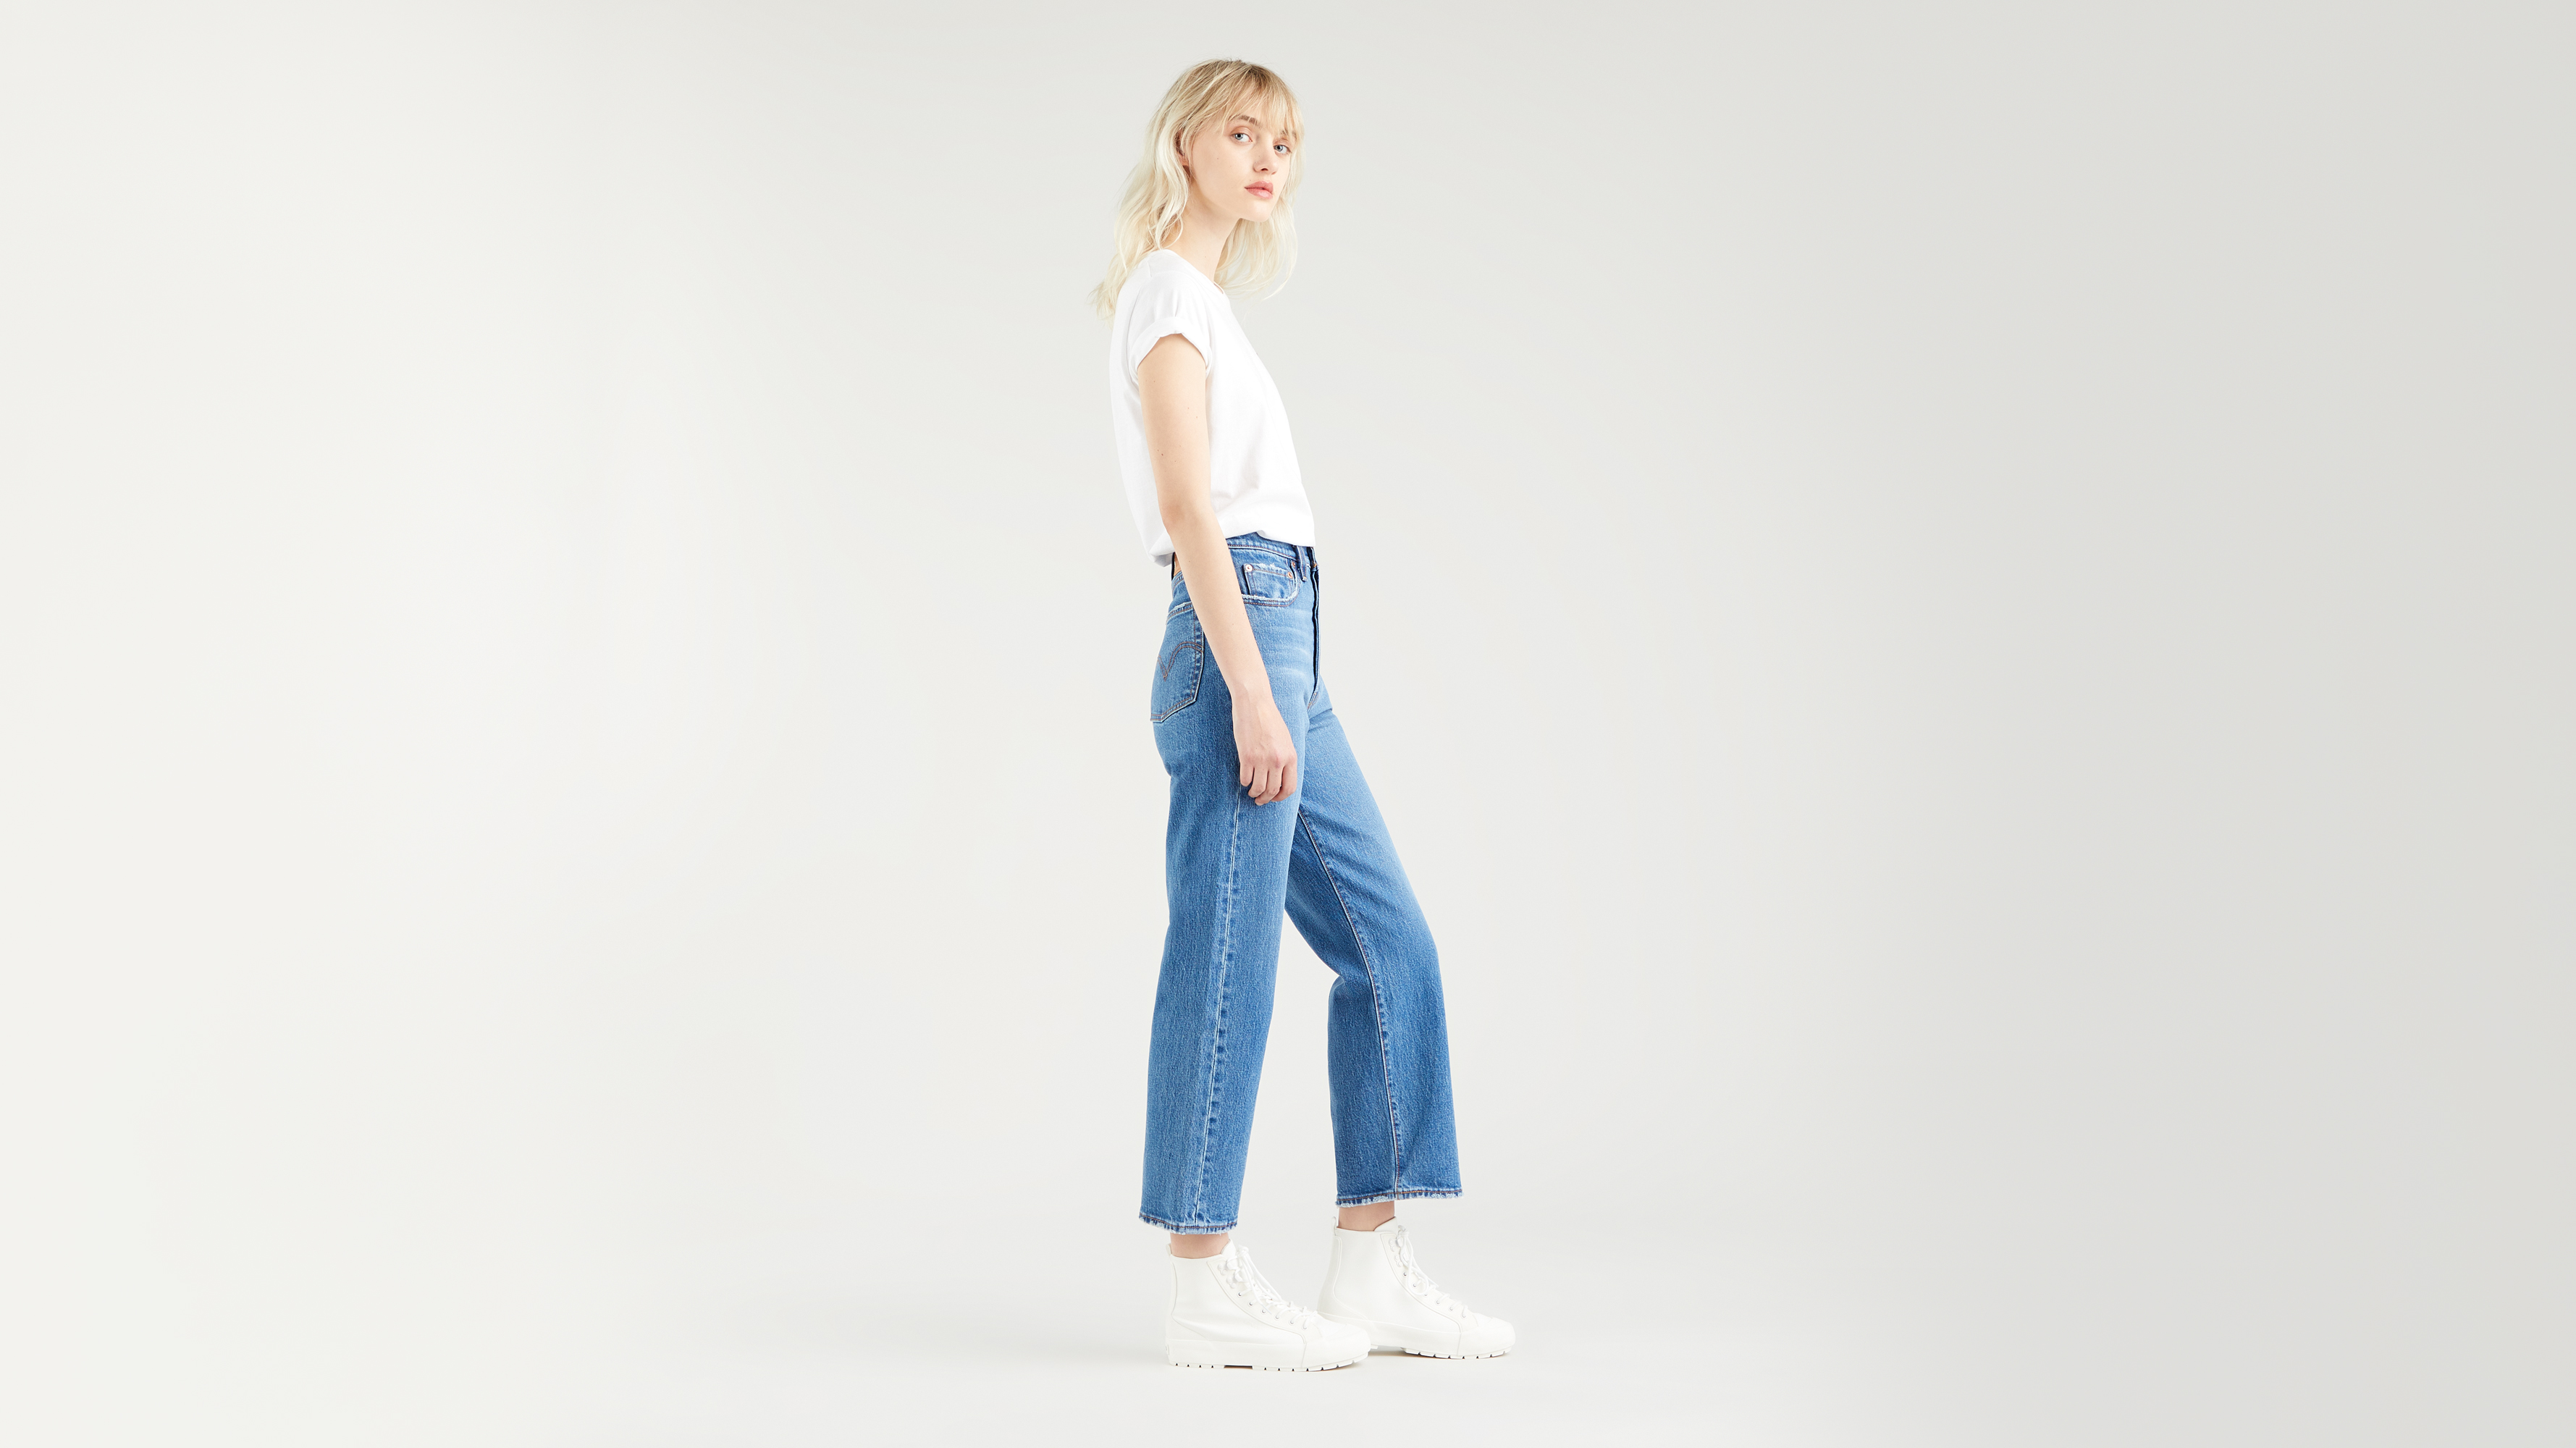  Ribcage Straight Ankle Jeans, Jive Together, 28/27